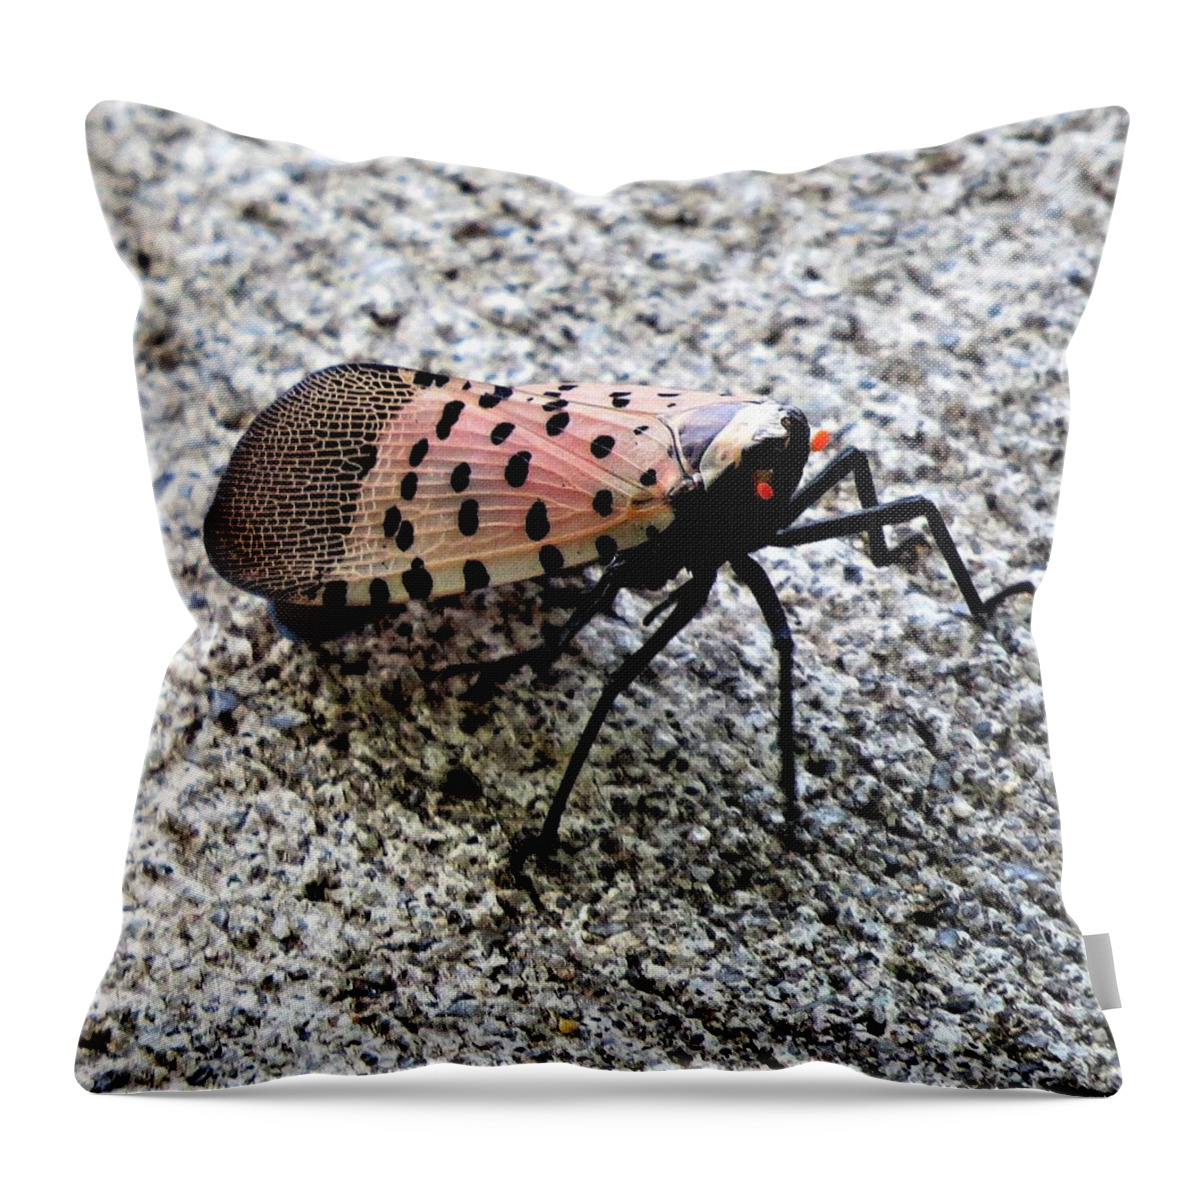 Insects Throw Pillow featuring the photograph Red Spotted Lanternfly Closeup by Linda Stern